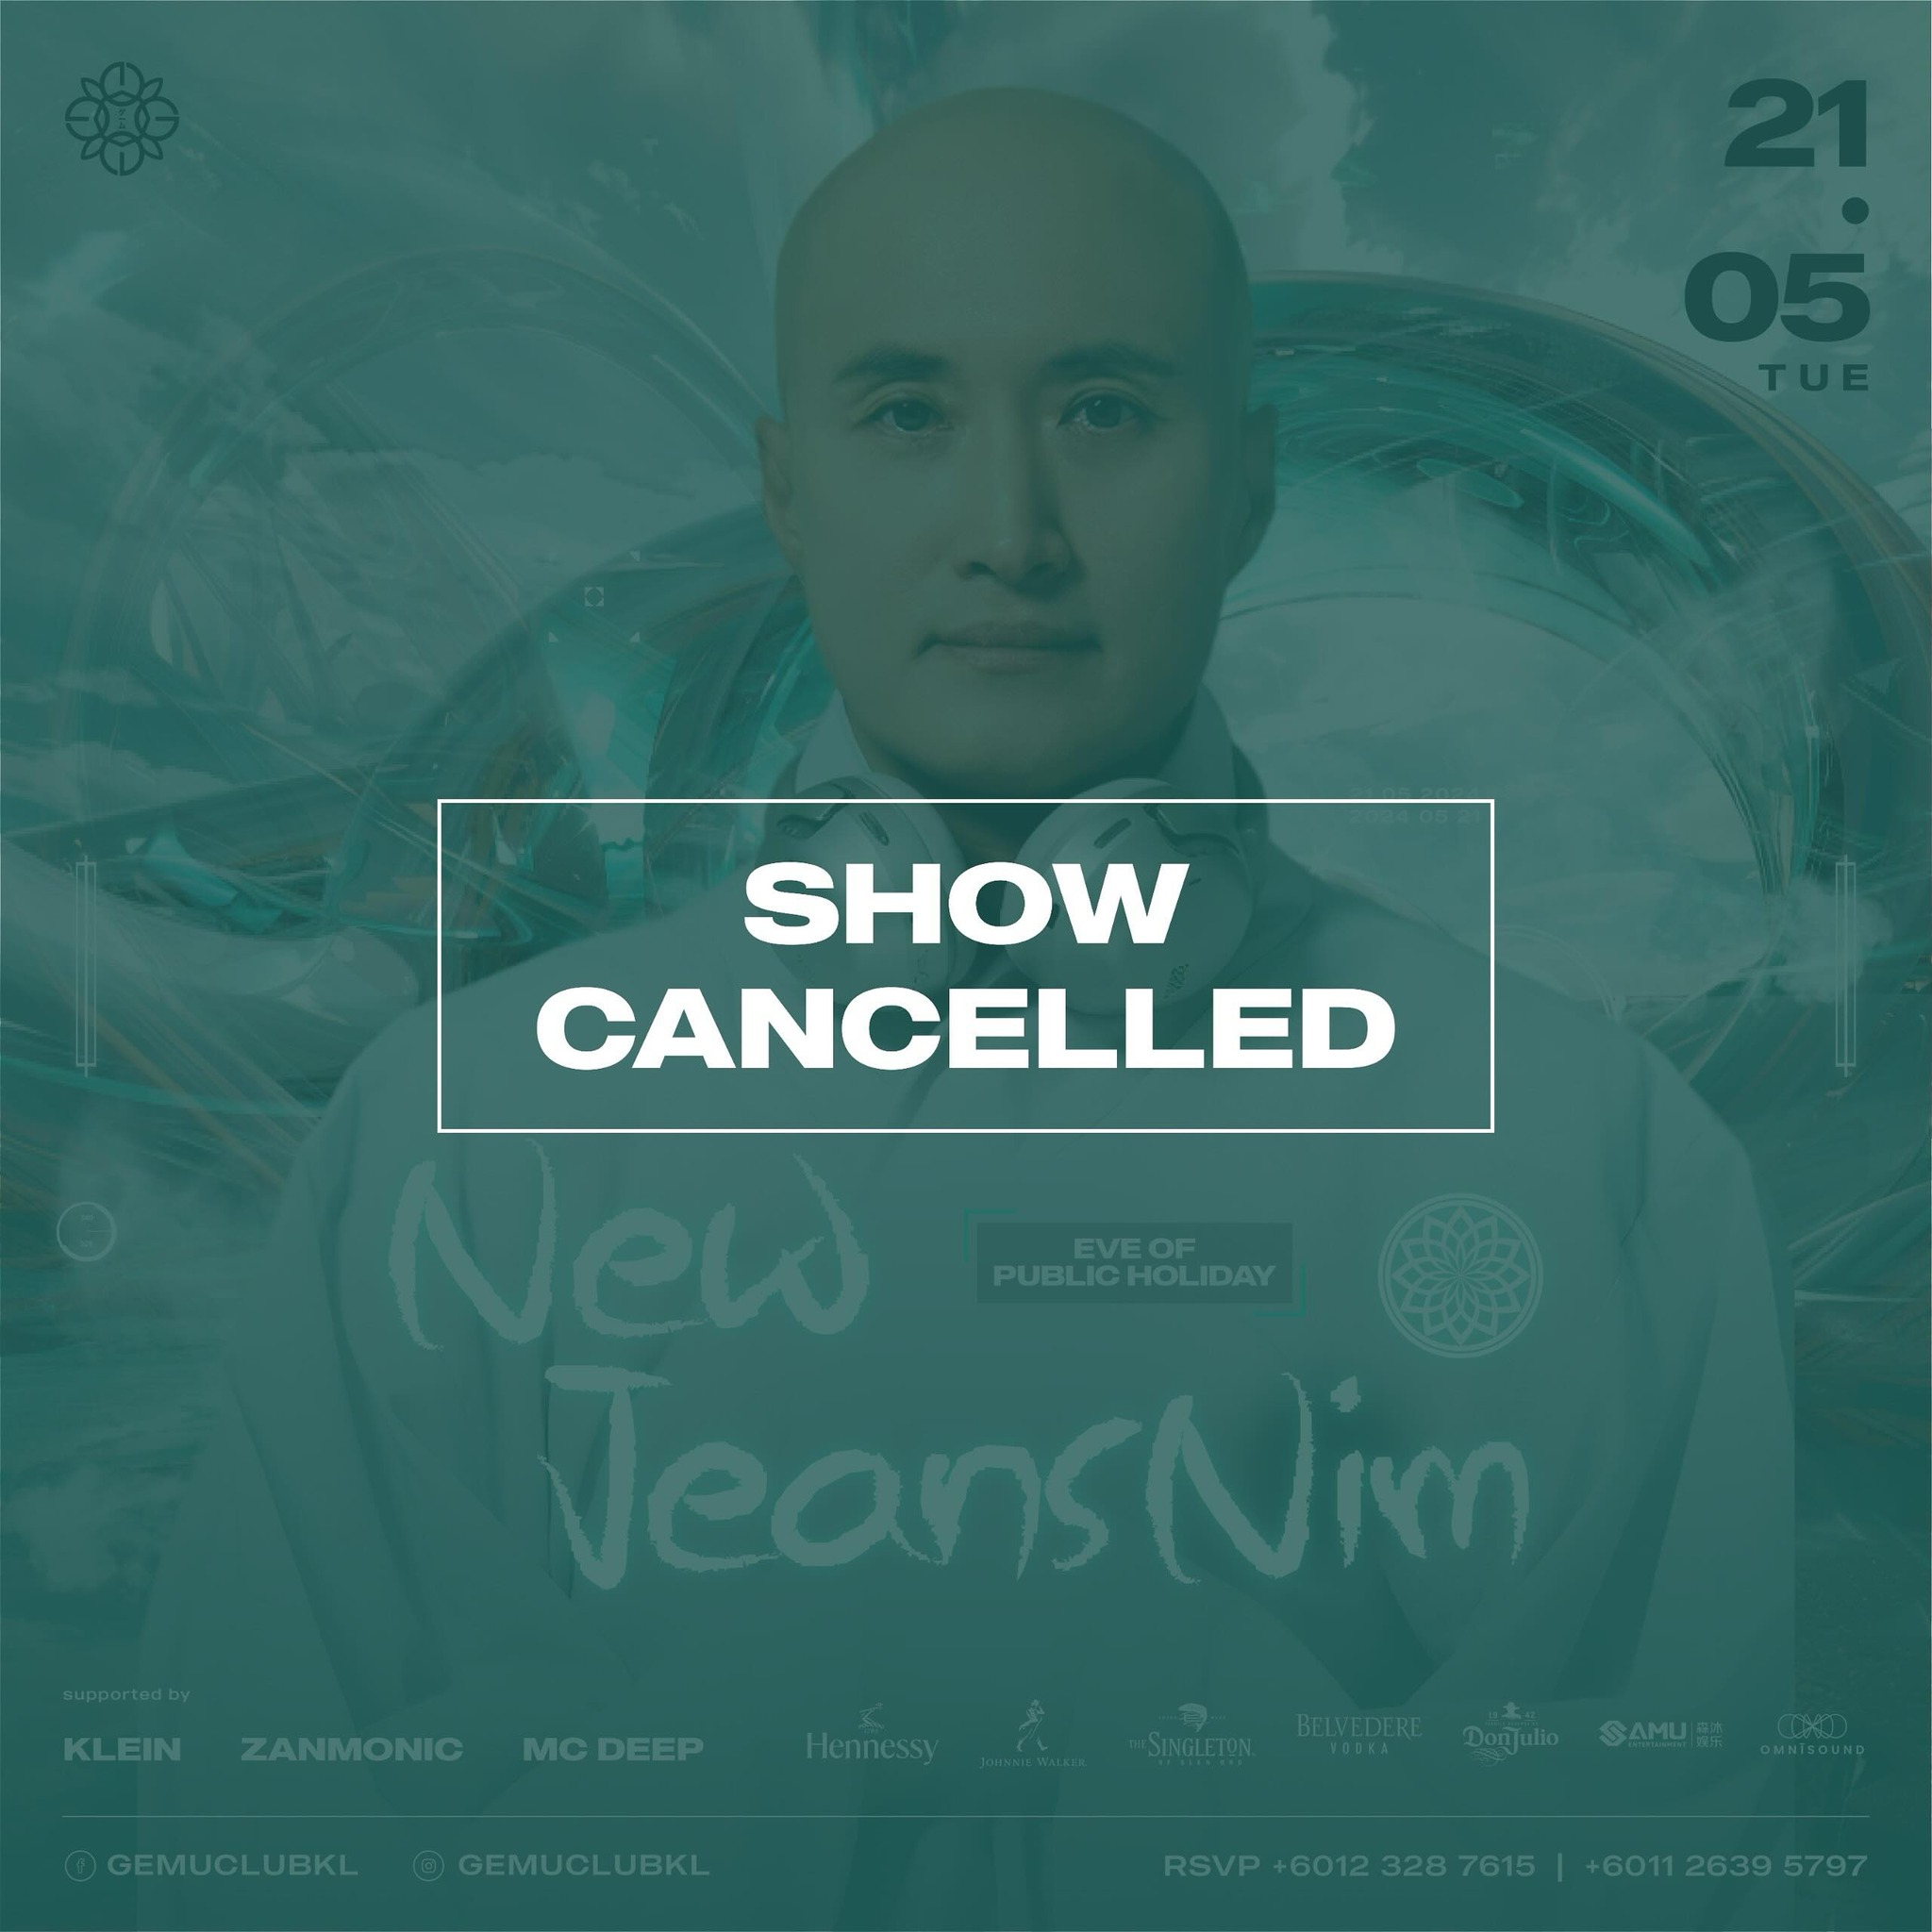 New jeans nim second show cancelled